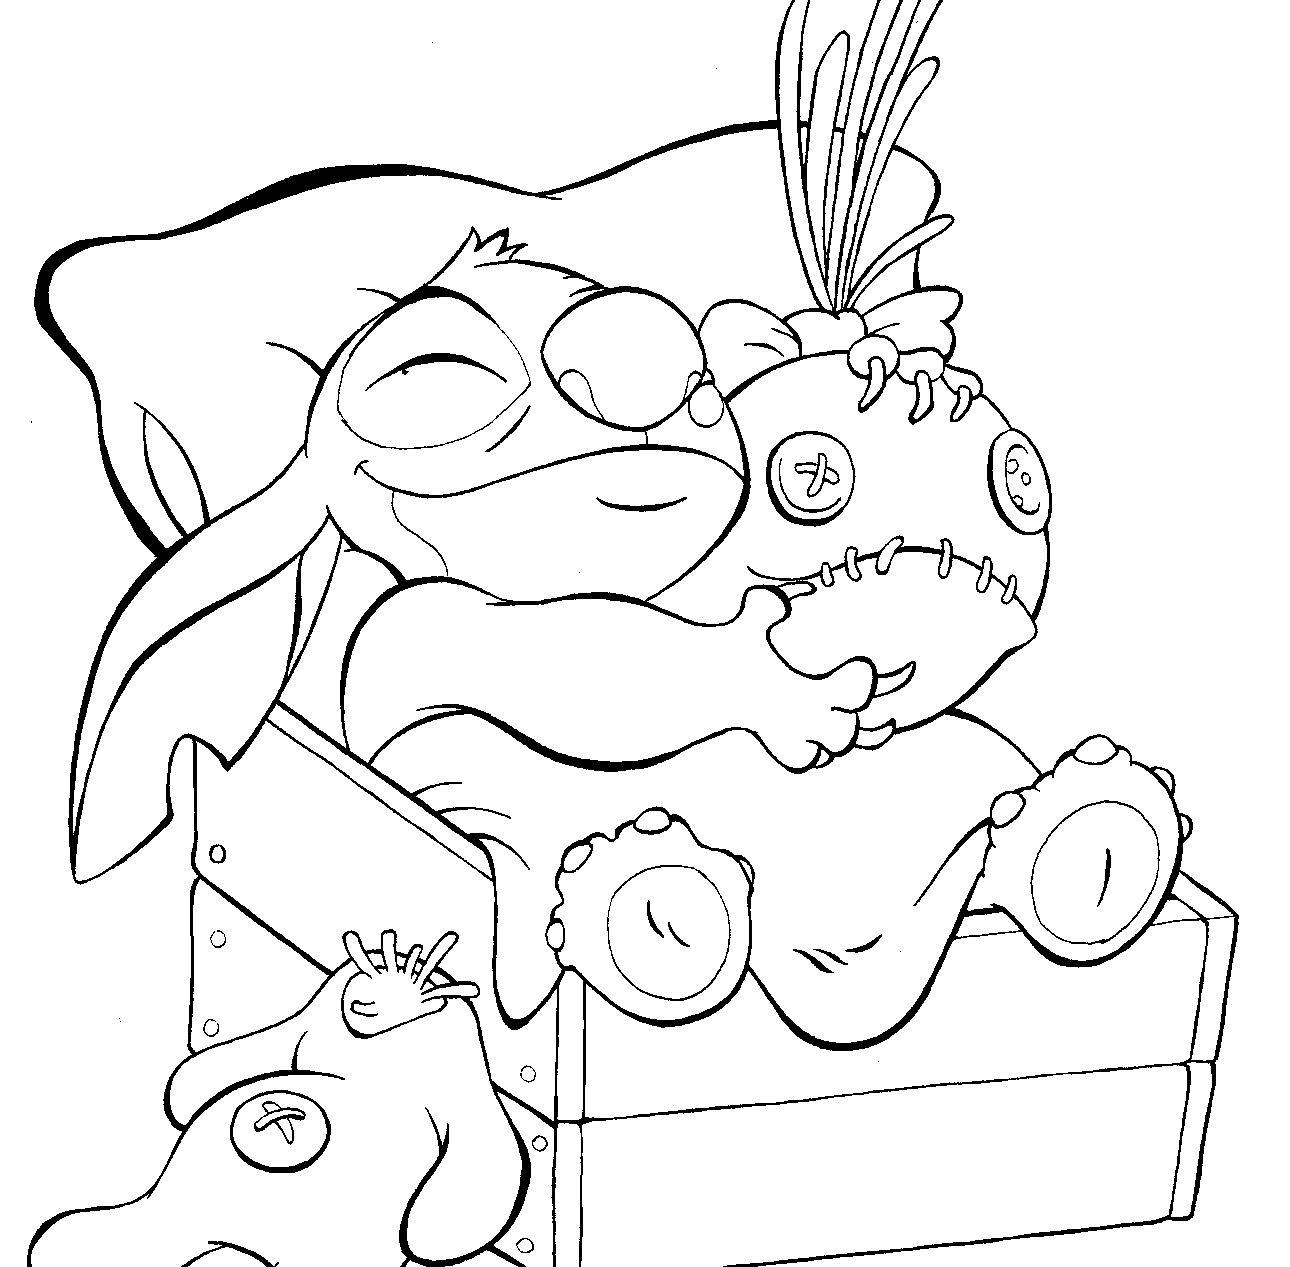 lilo-and-stitch-coloring-pages8-coloring-pages-for-kids